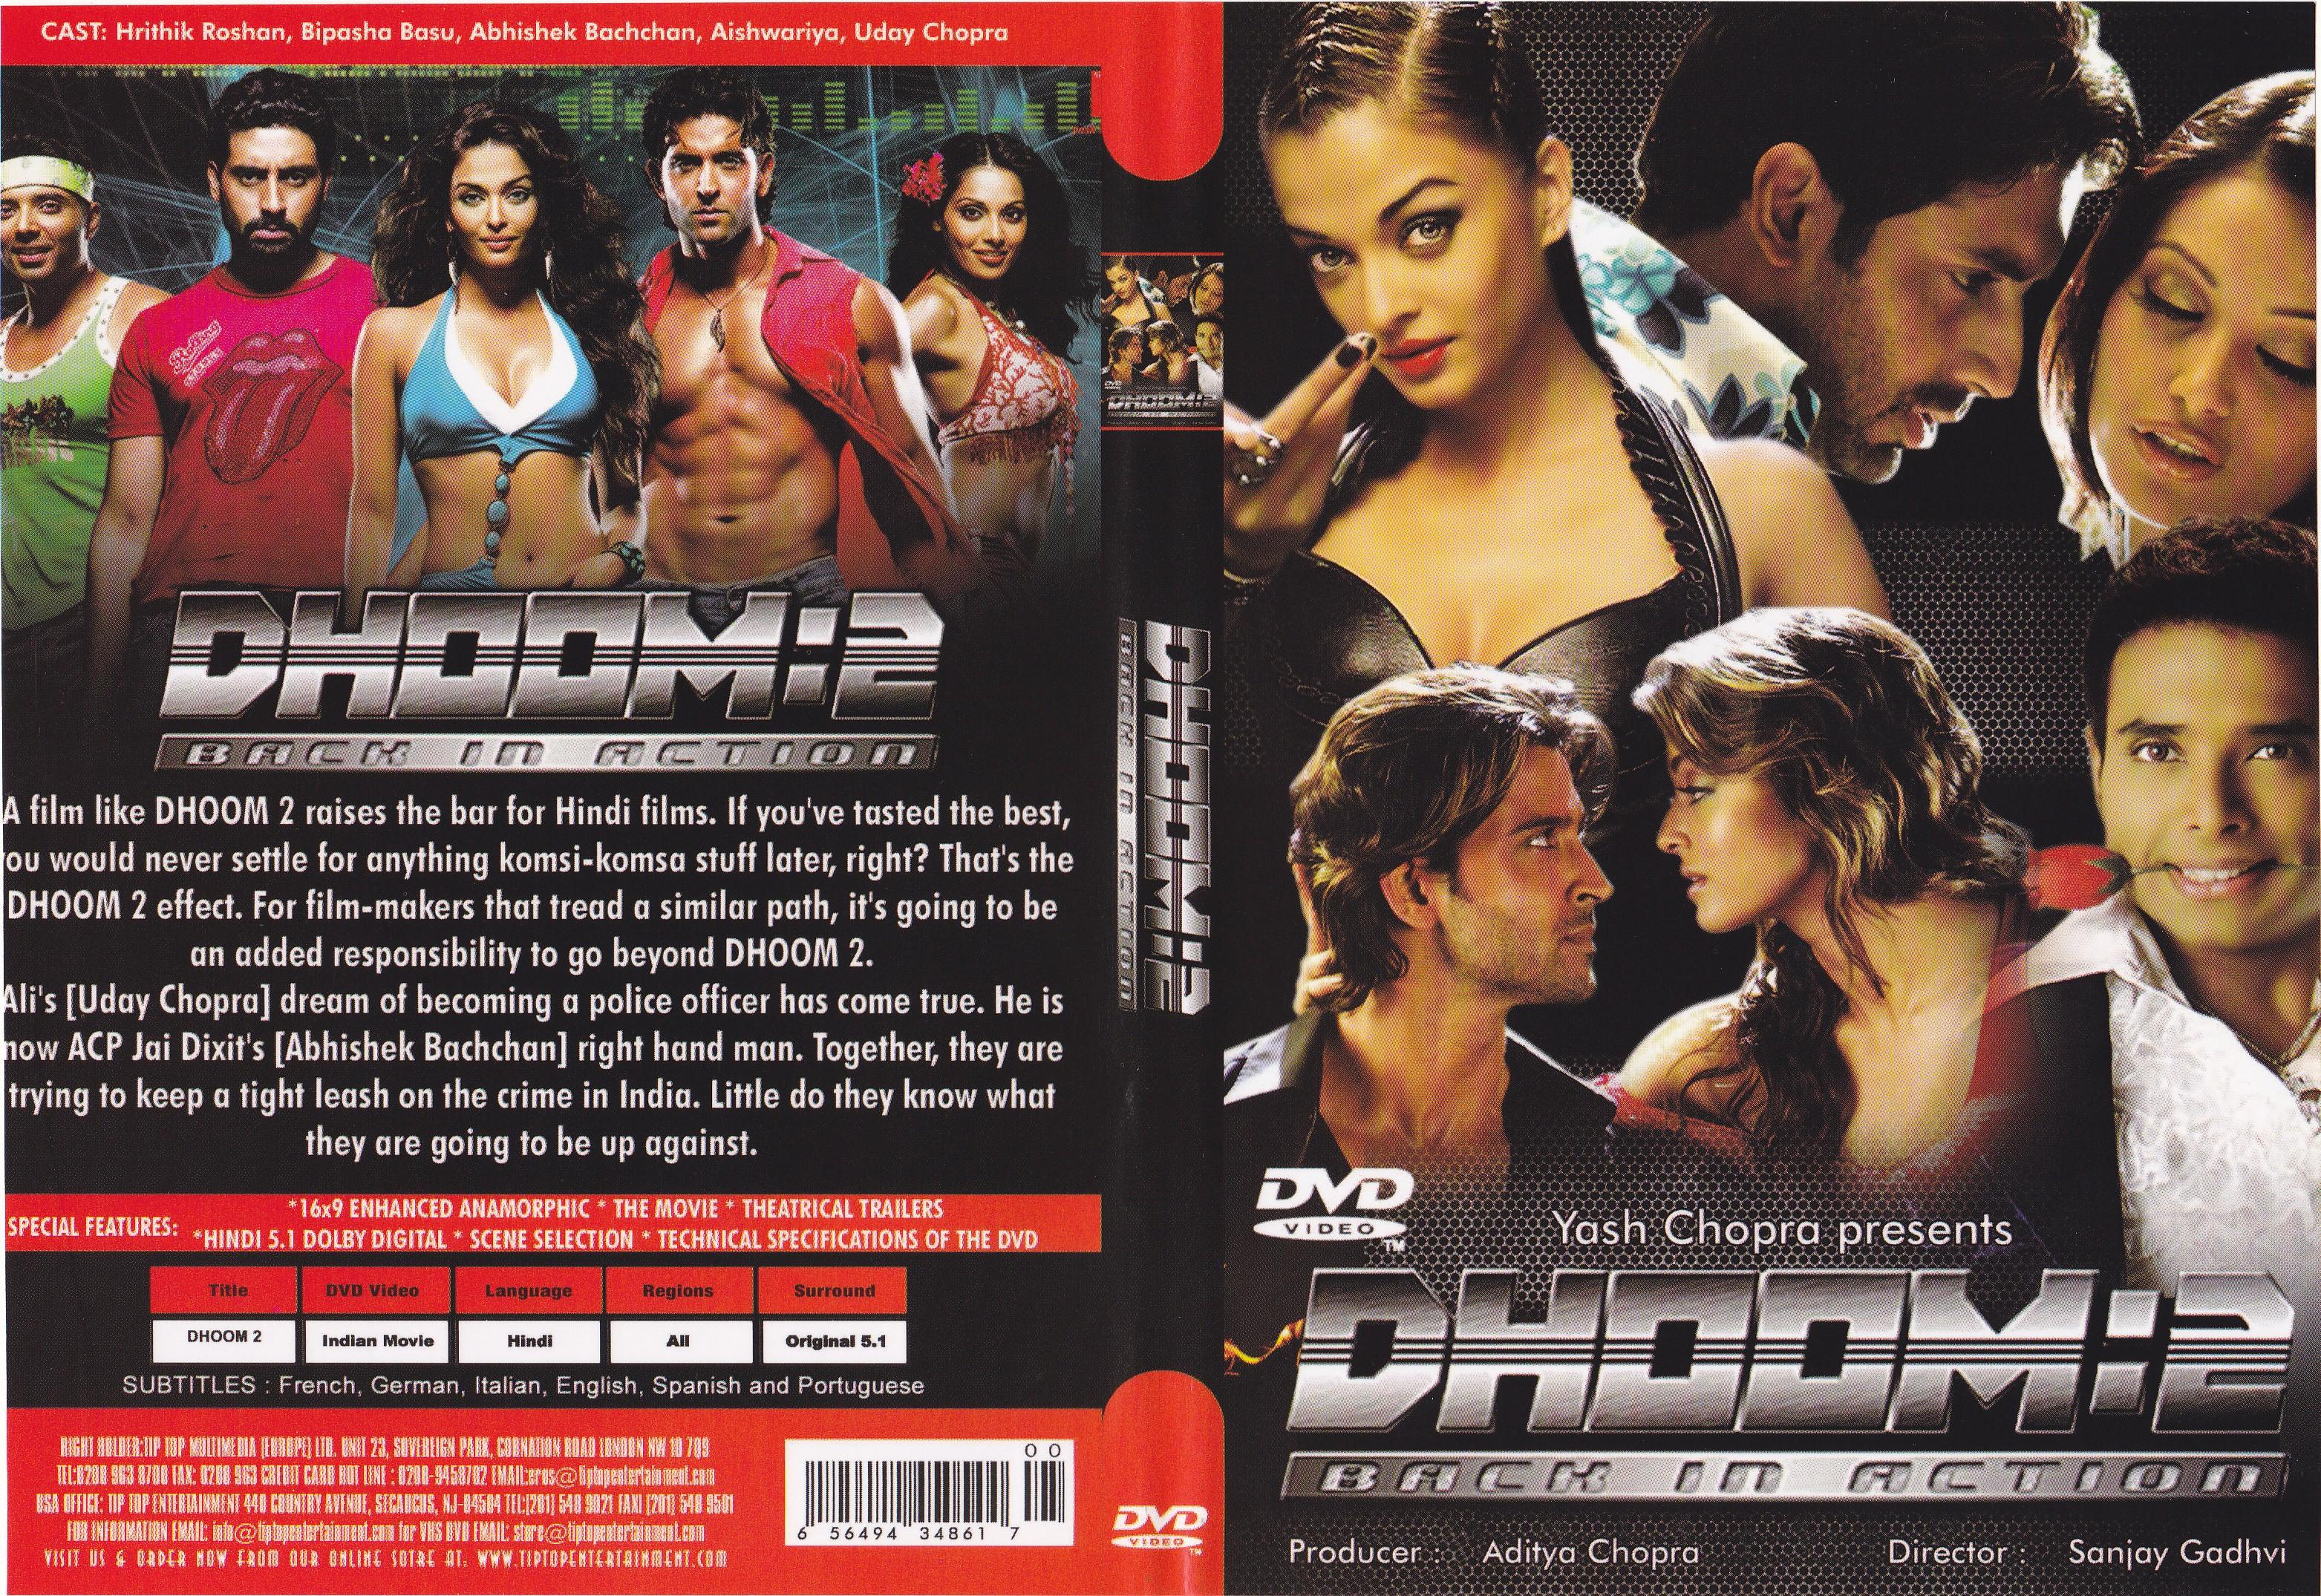 Jaquette DVD Dhoom 2